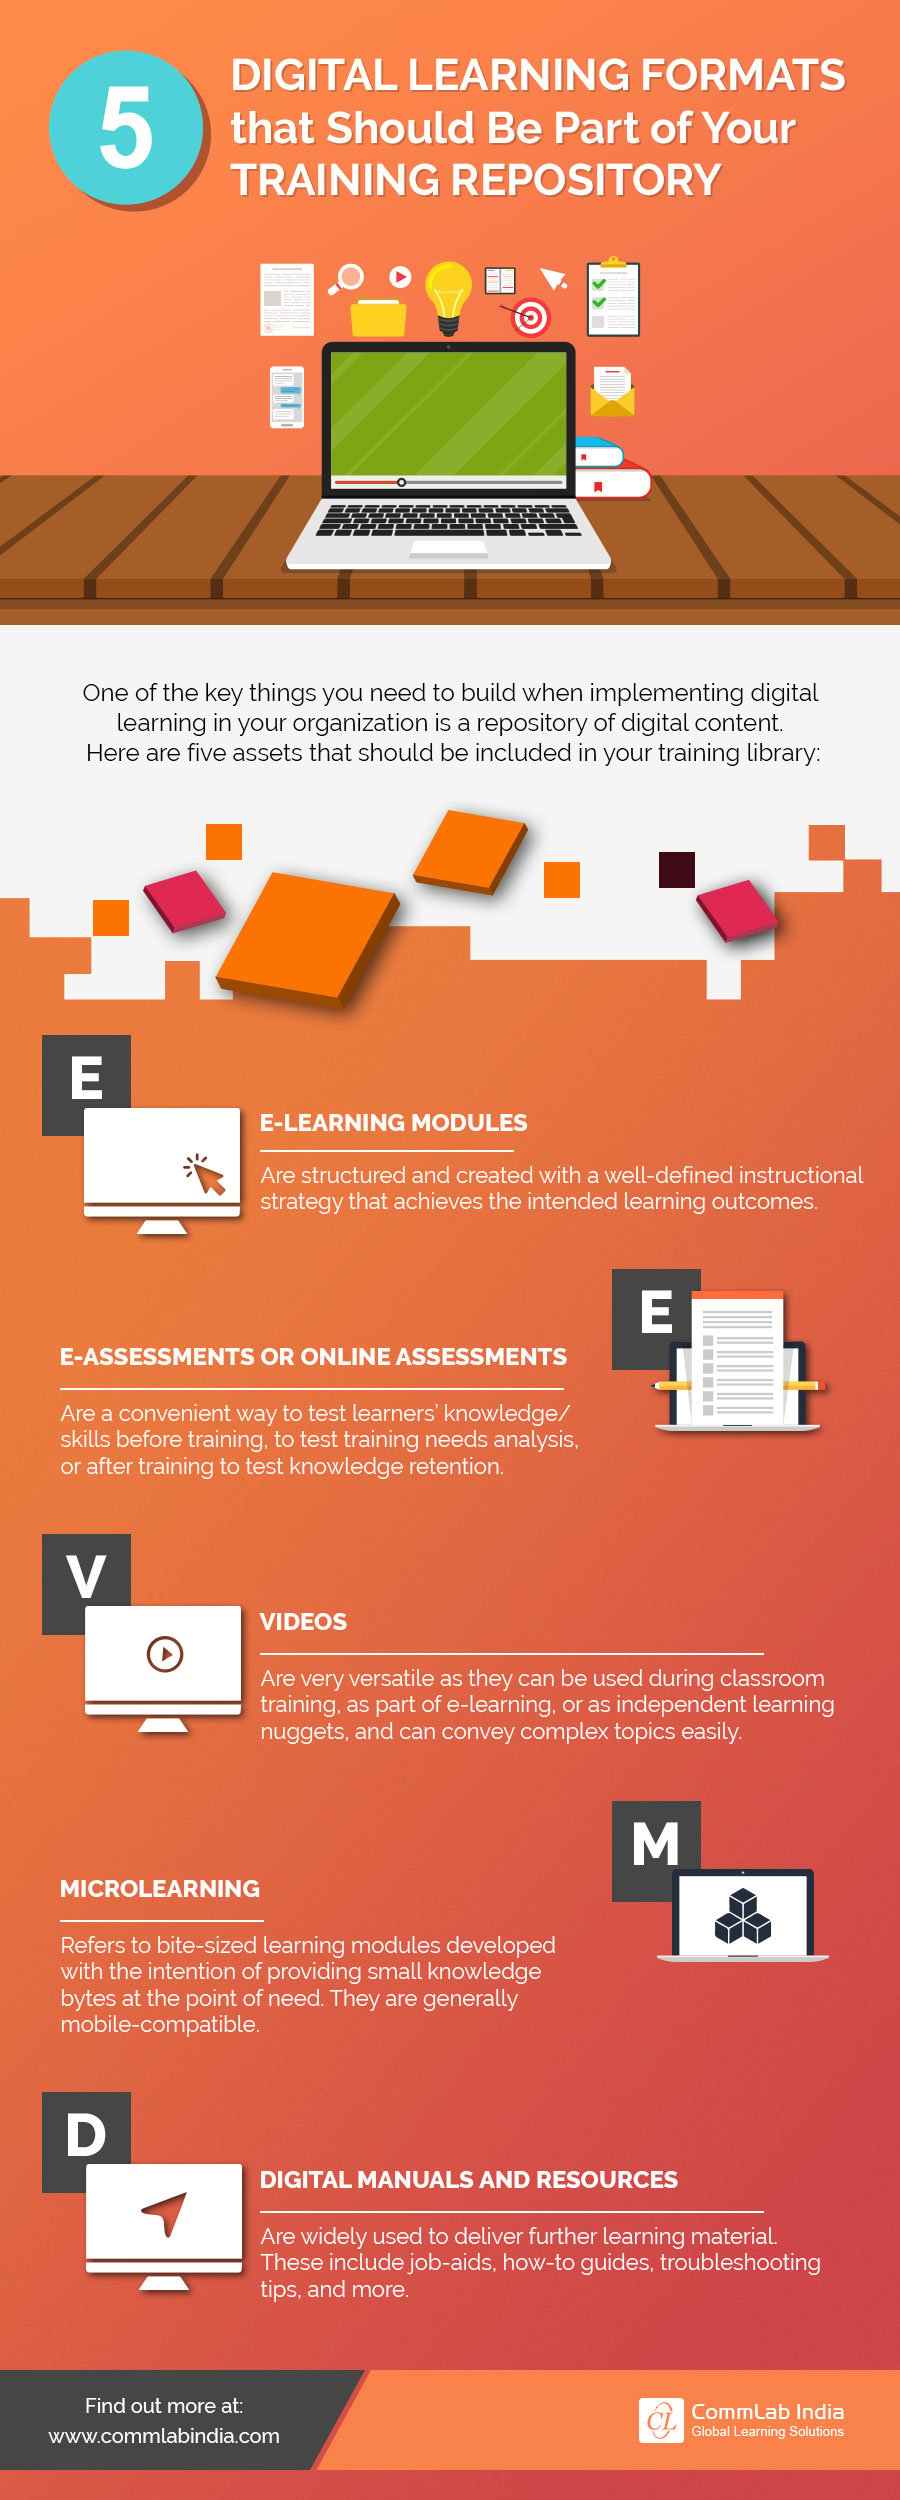 5 Digital Learning Formats that Should Be Part of Your Training Repository [Infographic]